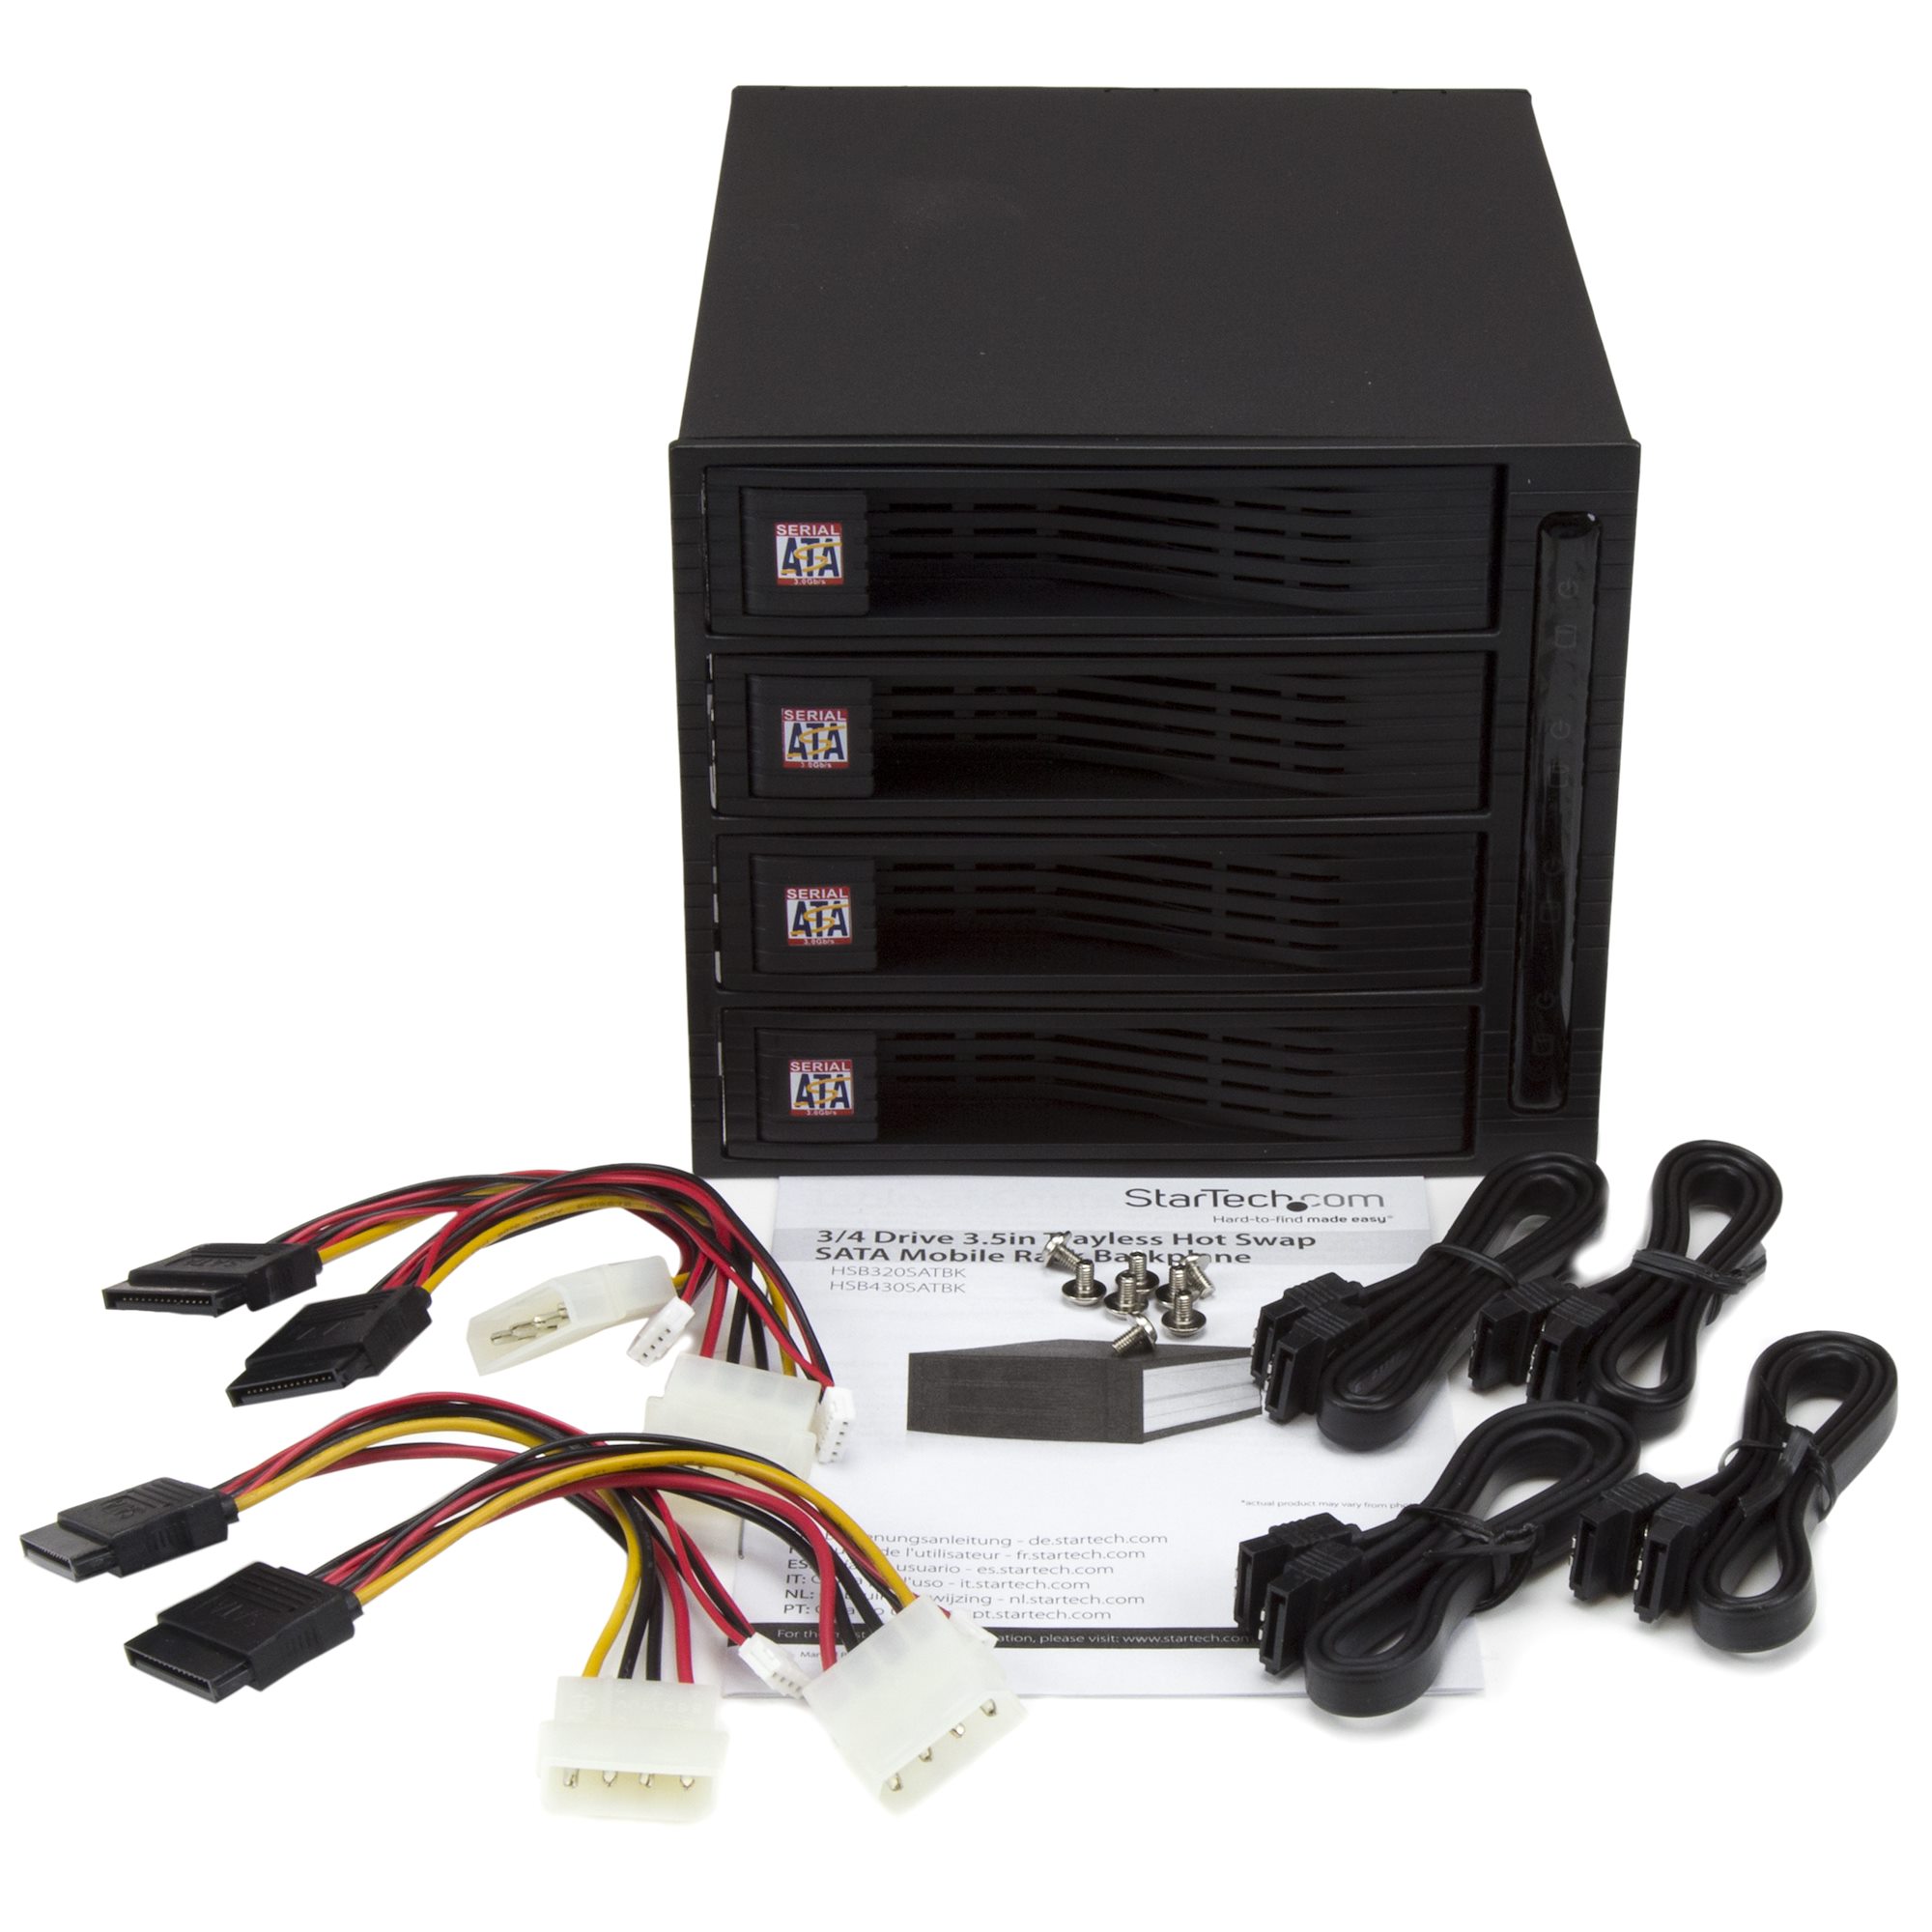 2.5 SATA SSD / HDD Mobile Rack - Hot Swap Trayless Mobile Rack - Dual-Bay  Rack for 3.5” Bay - RAID HDD Rack (HSB225S3R)